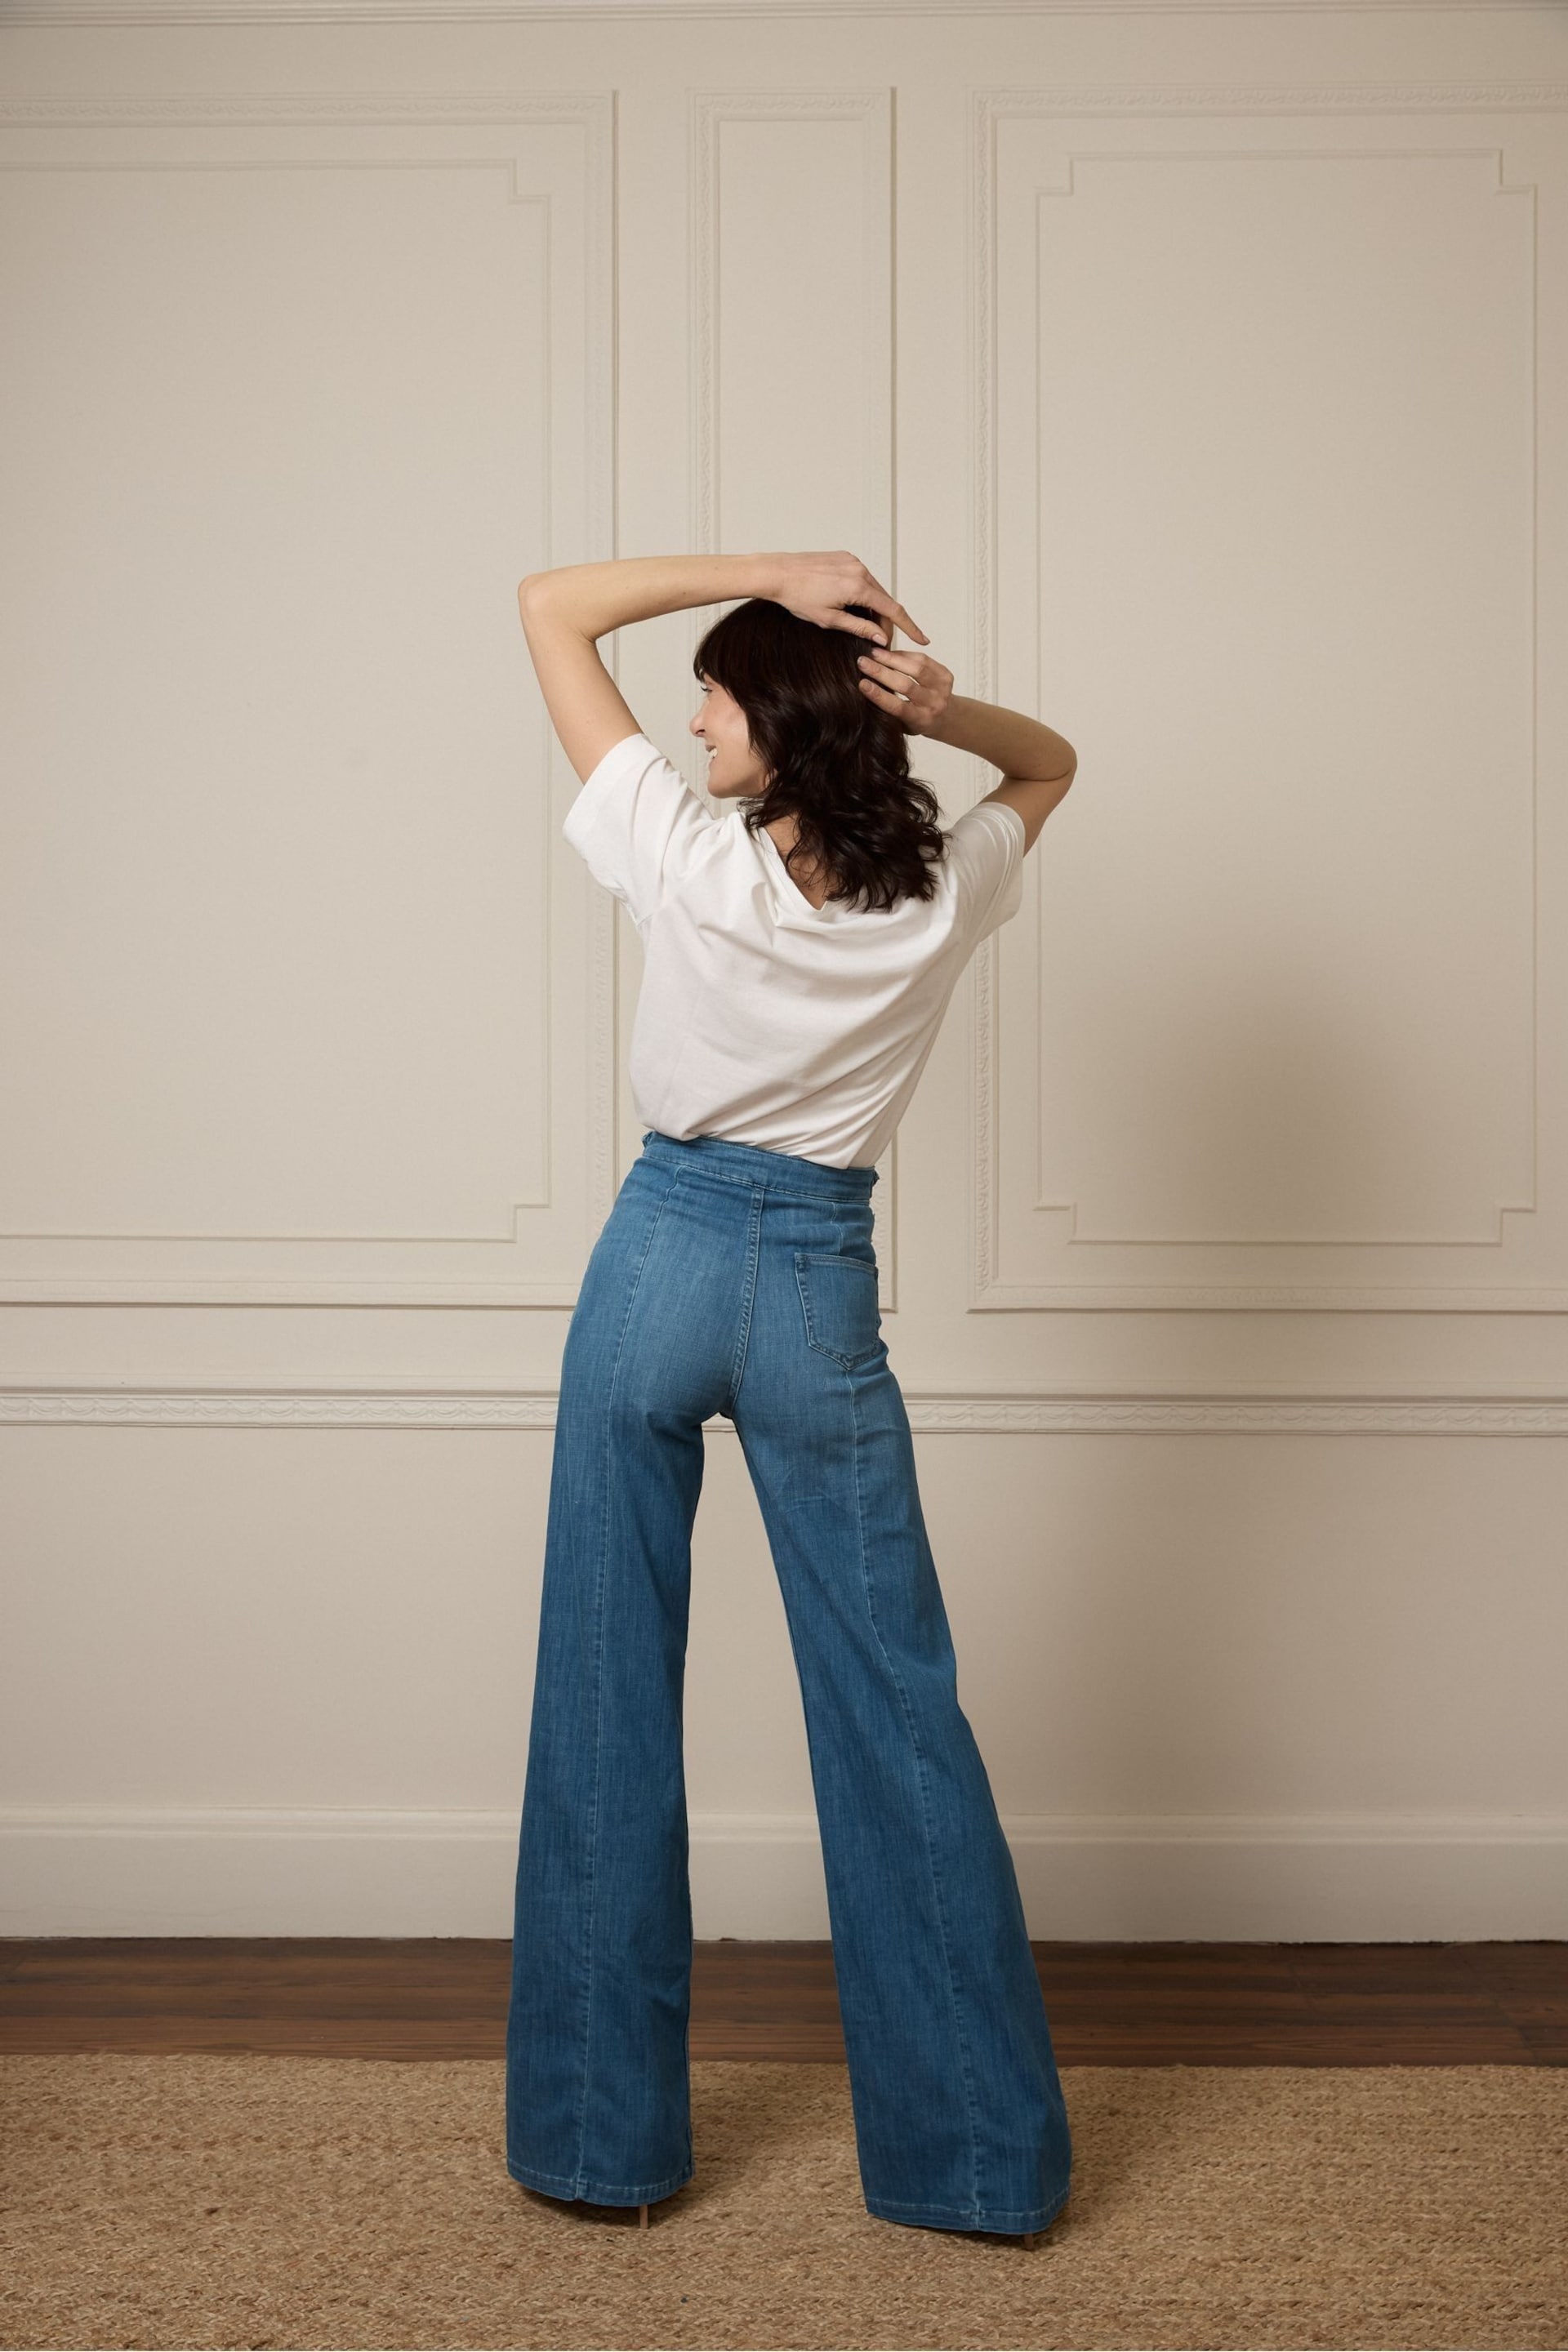 DONNA IDA Minnie The High Top Full Length Wide Leg Flare Blue Jeans - Image 2 of 5